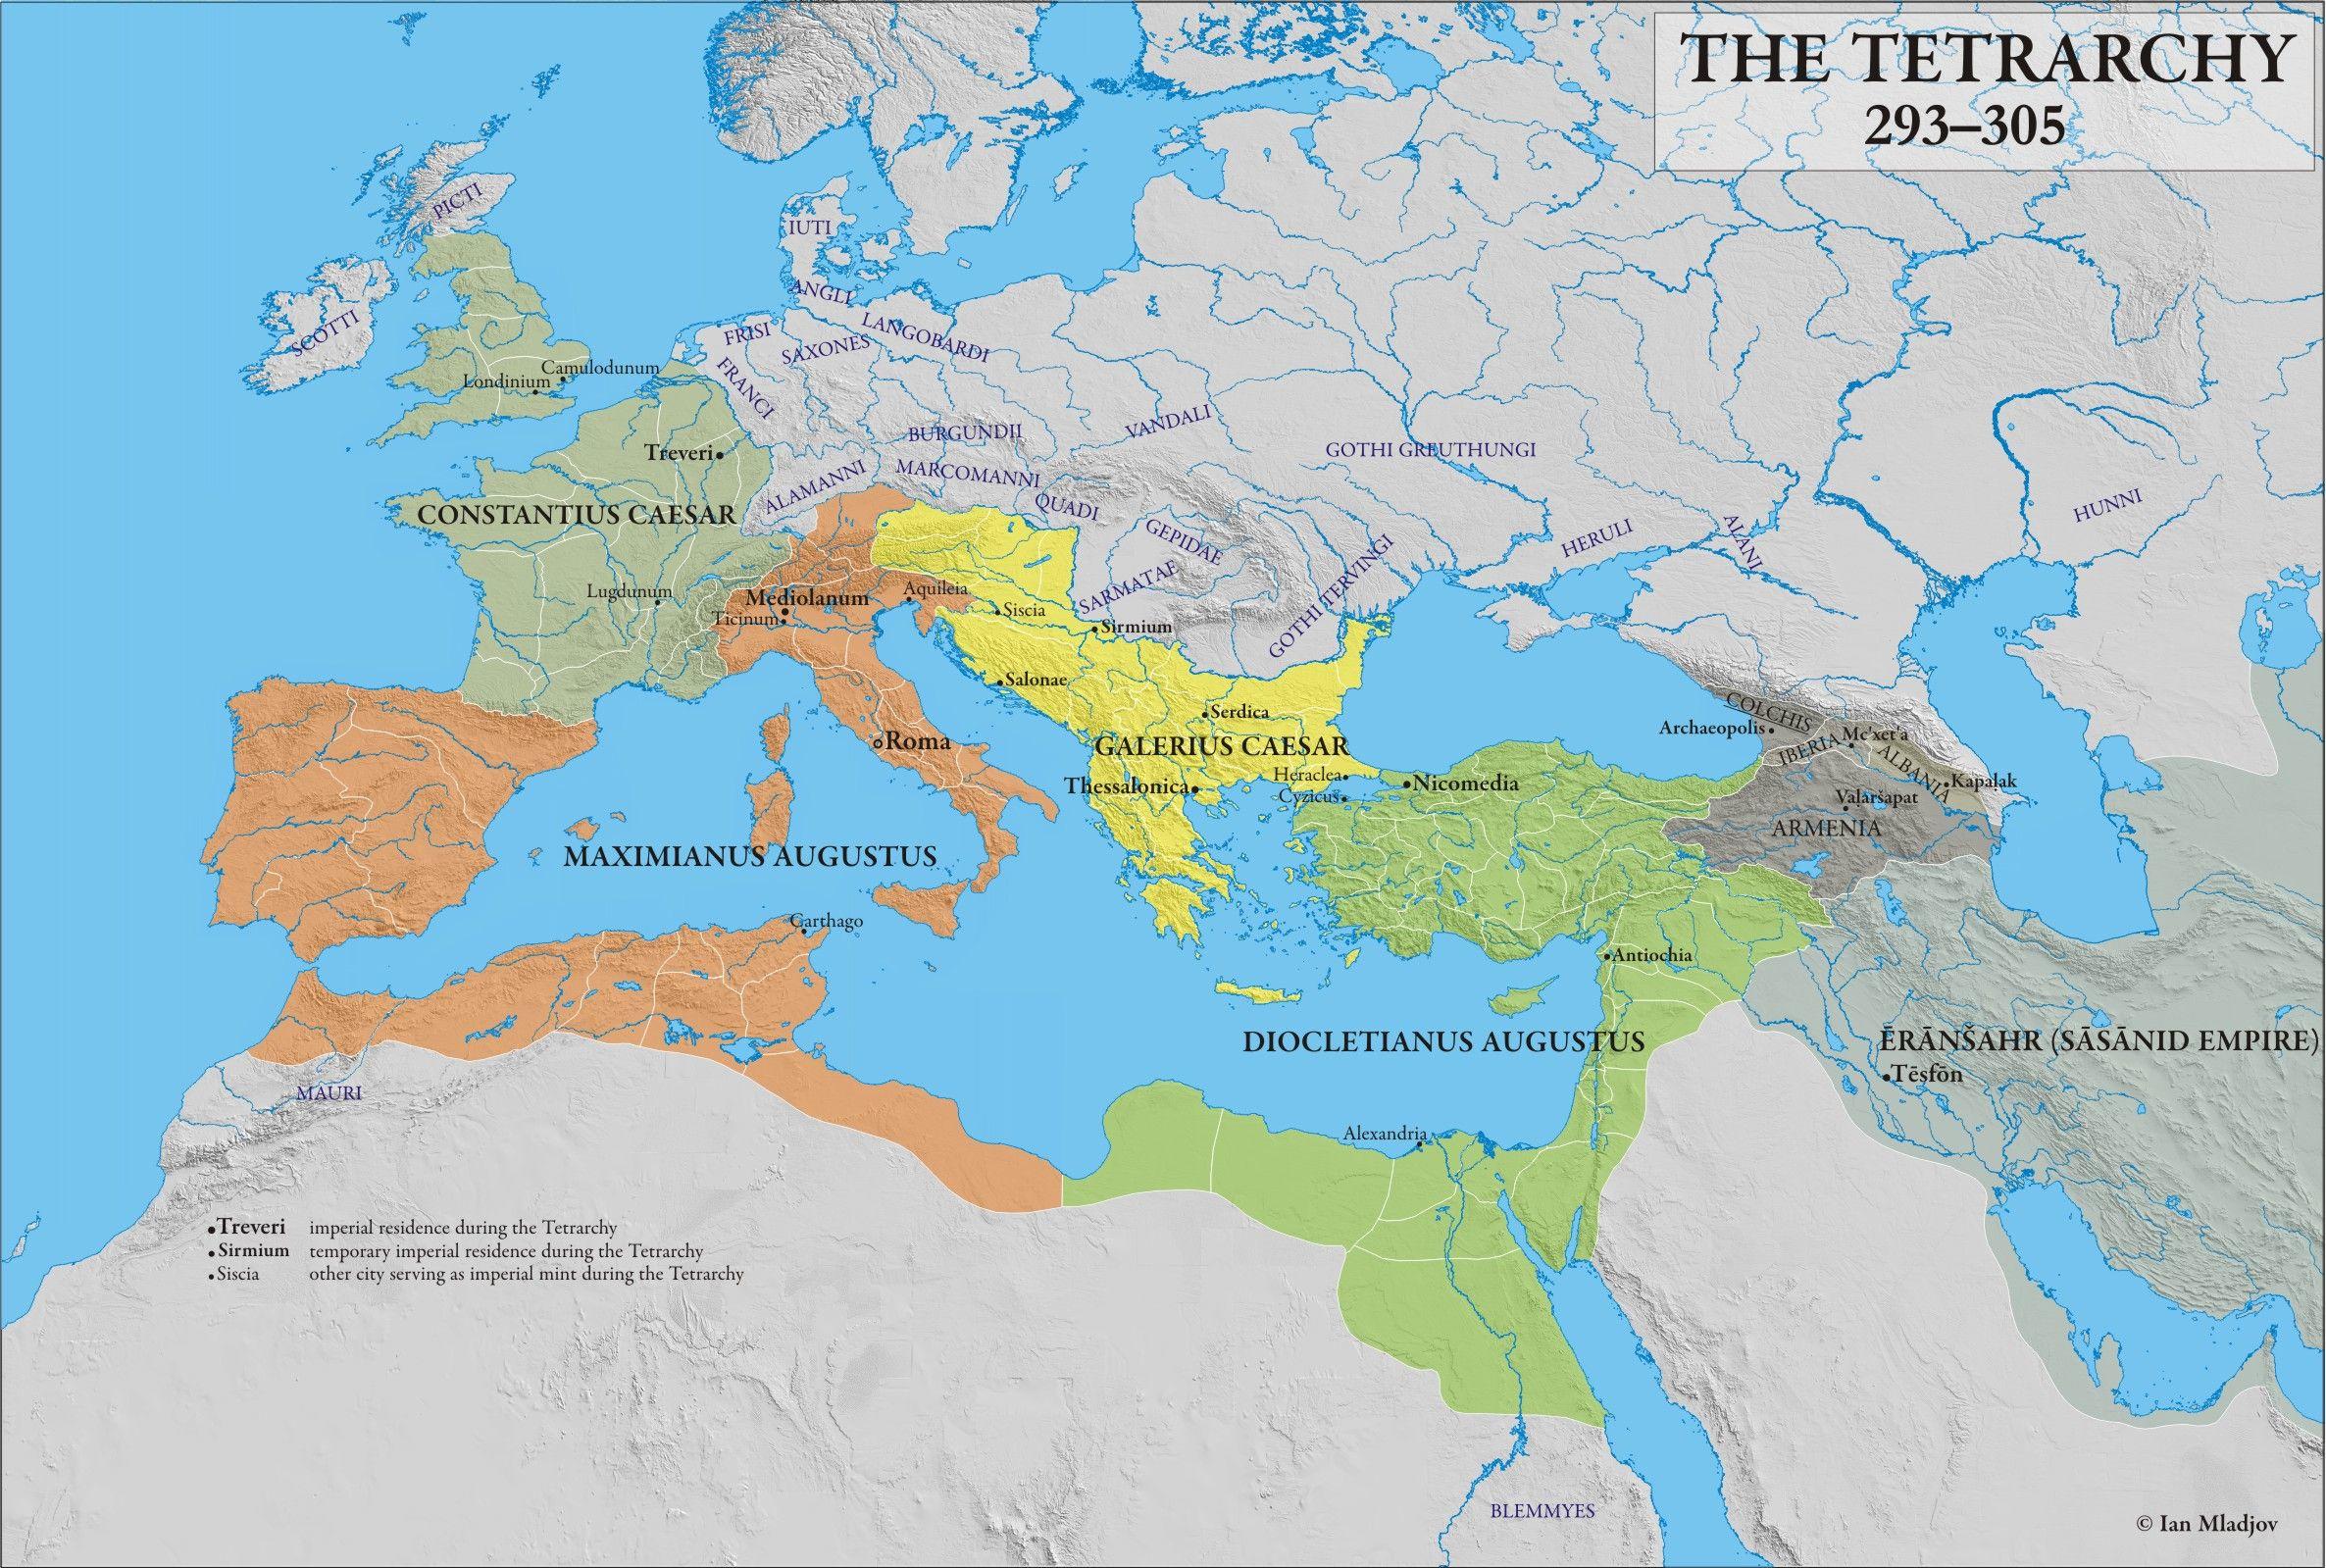 Tetrarchy Map and Rule in the Roman Empire - Istanbul Clues